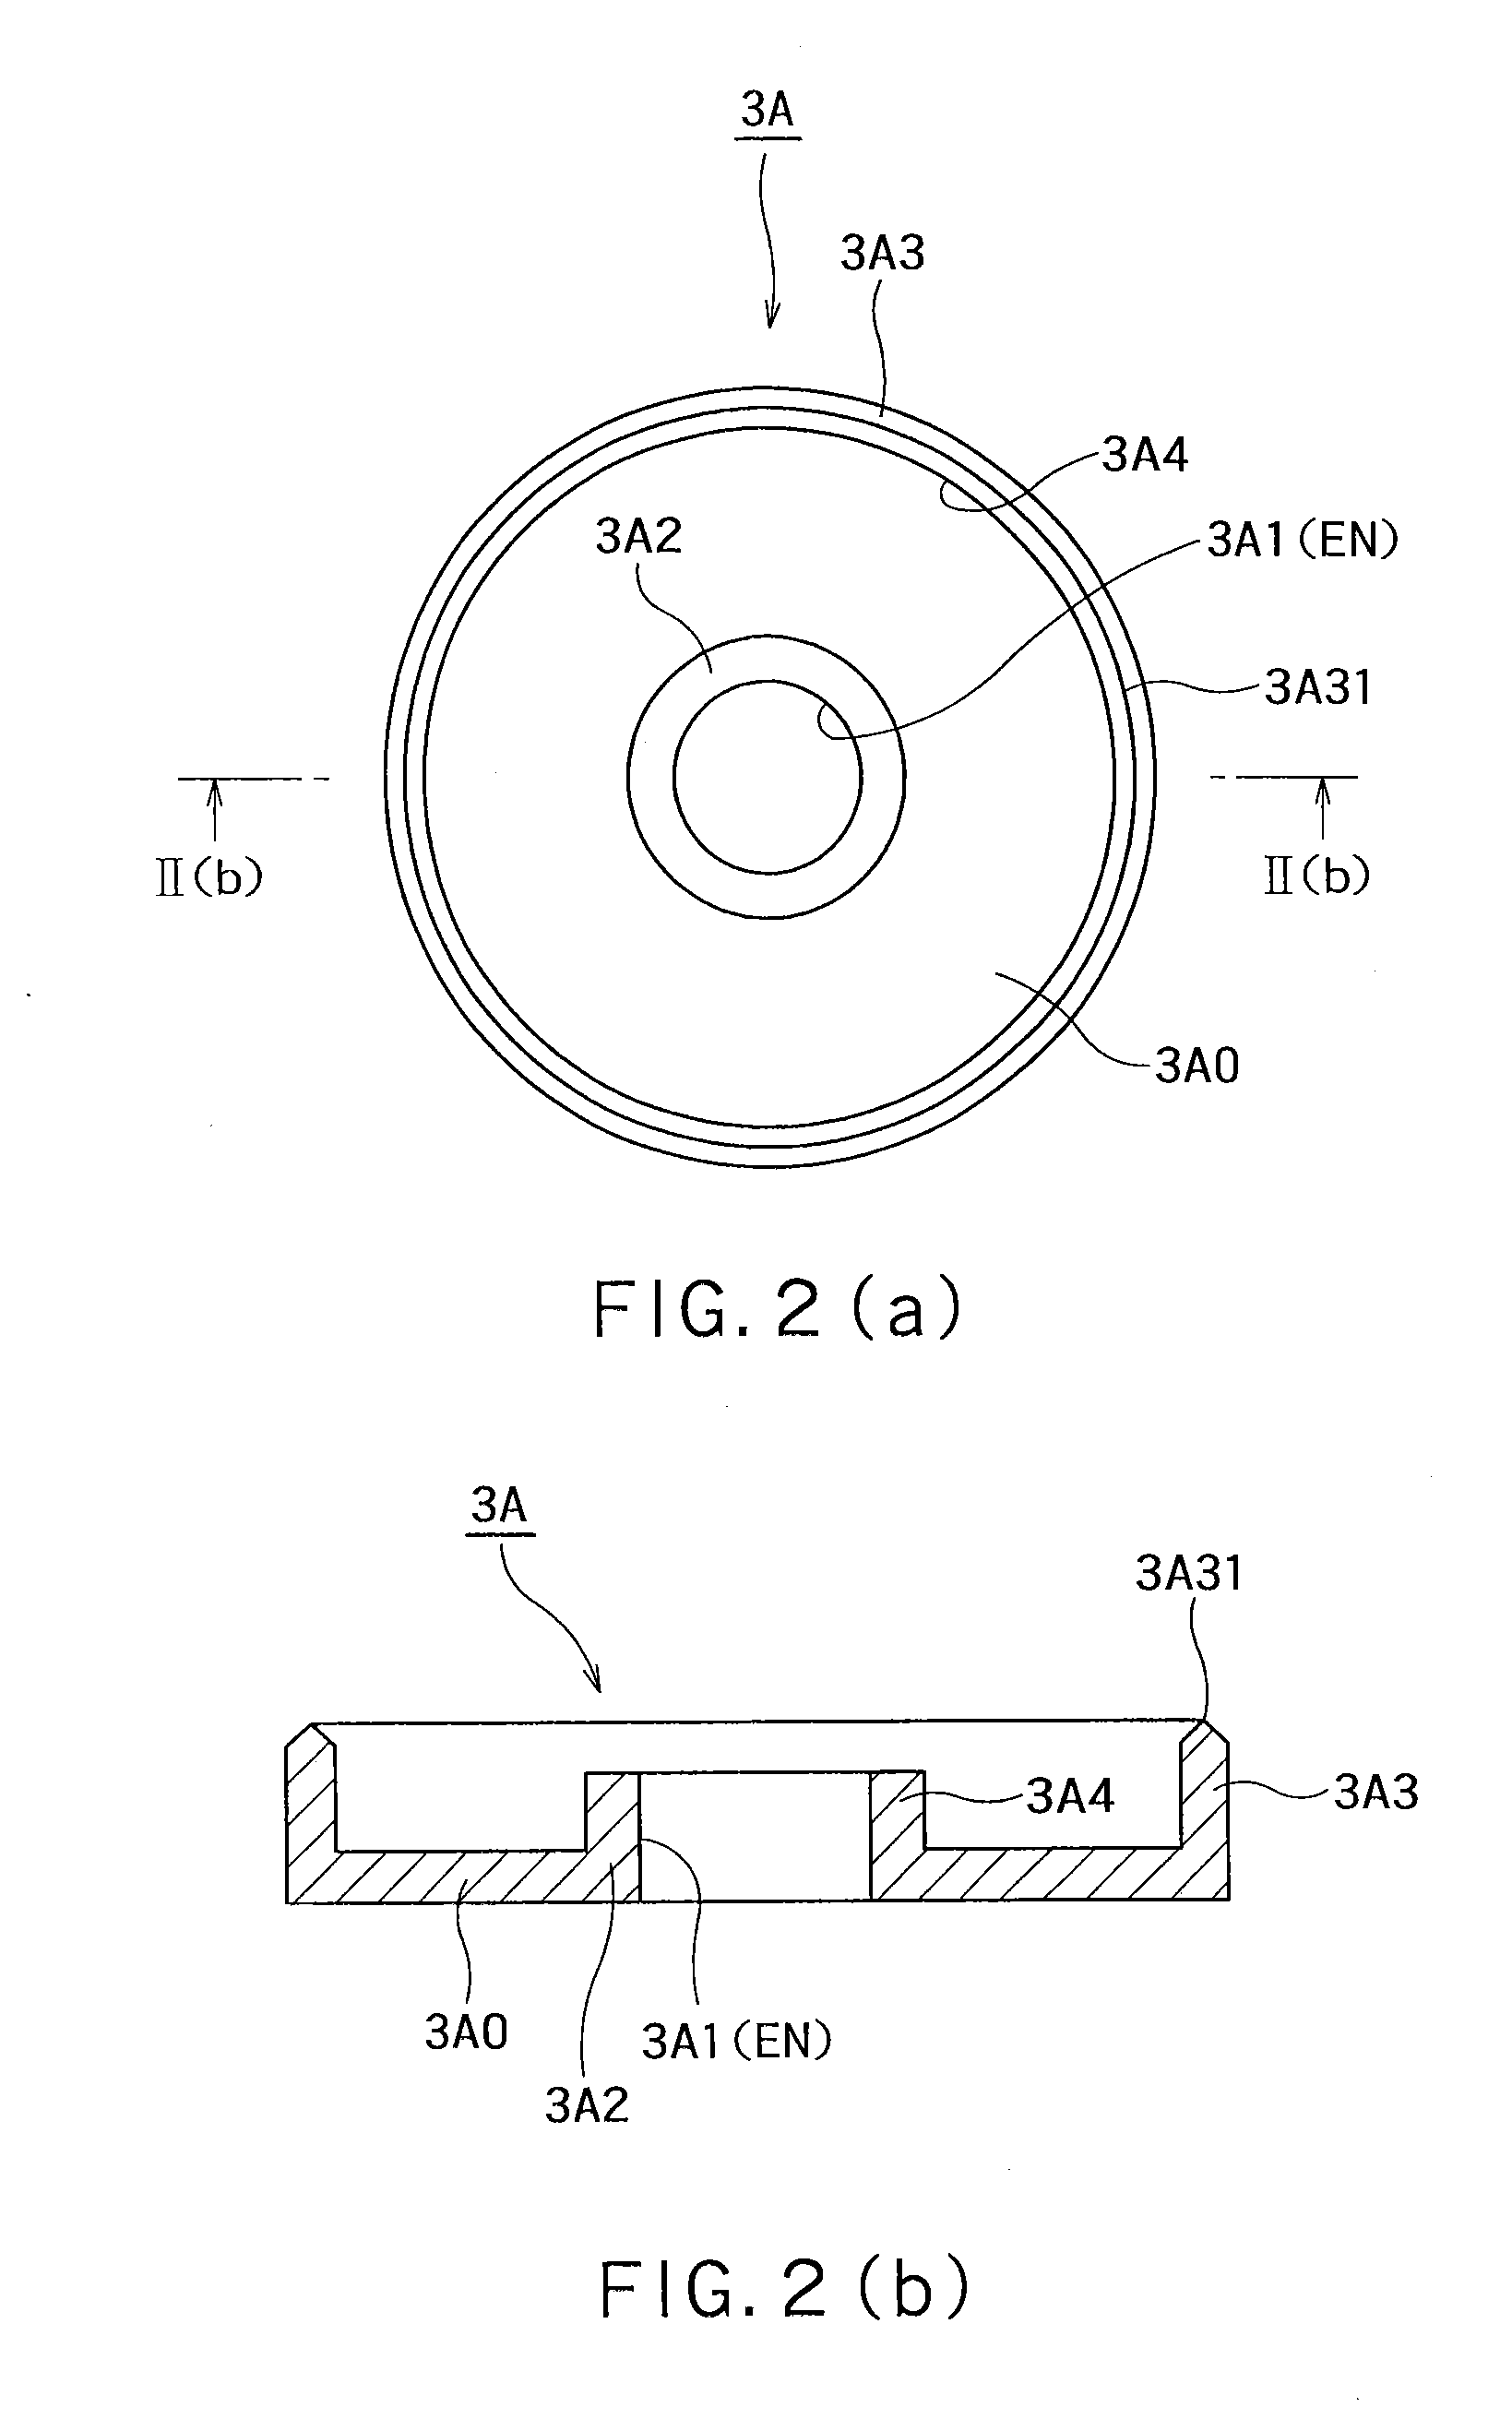 Molding device for continuous casting with stirring unit